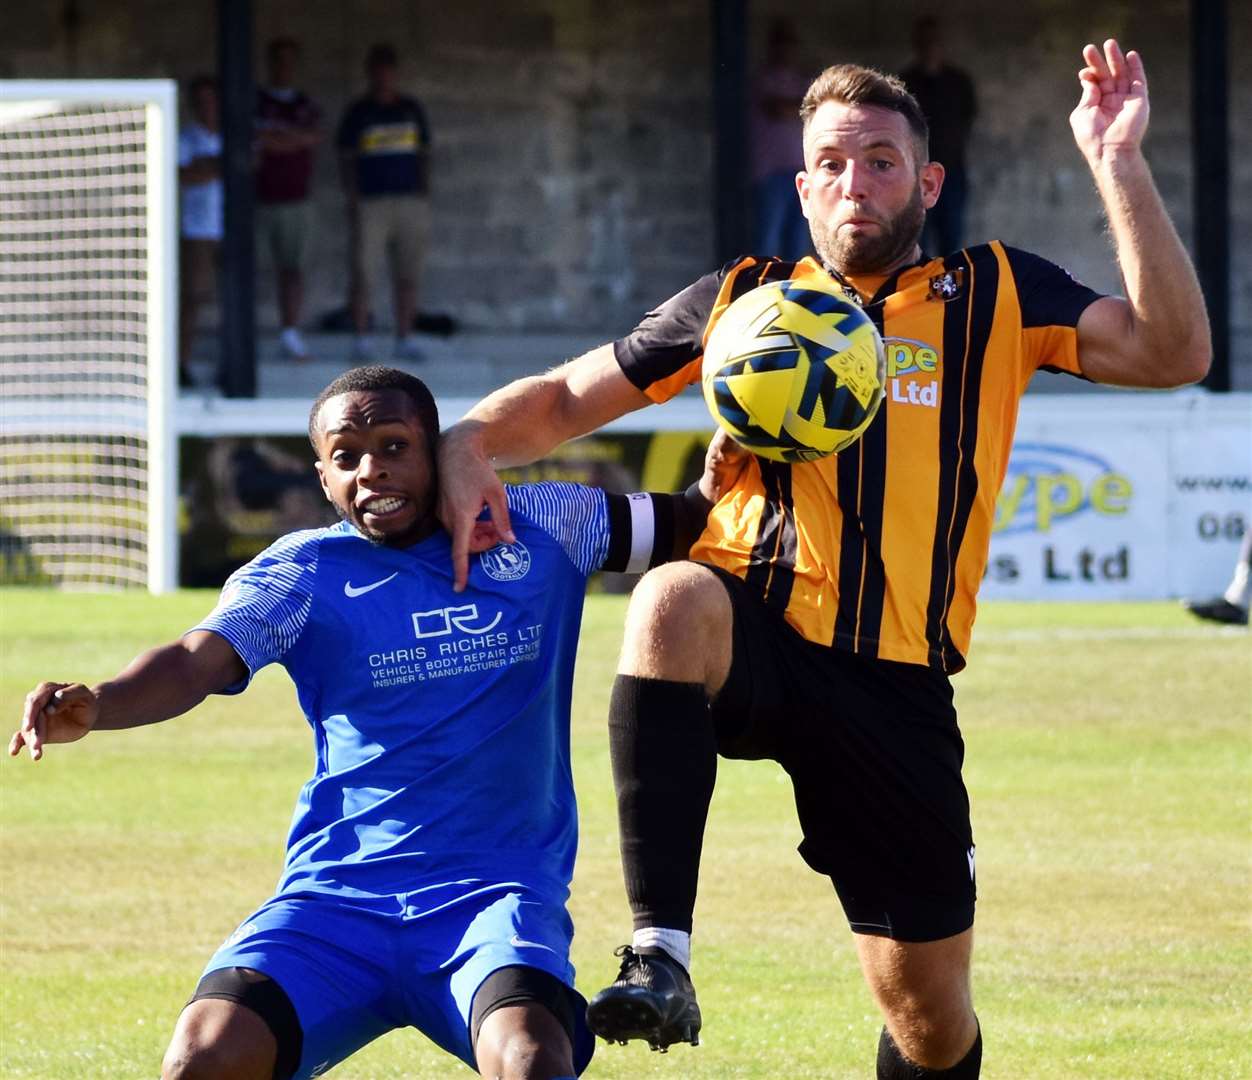 Folkestone's Josh Vincent and Herne Bay captain Kieron Campbell battle it out. Picture: Randolph File